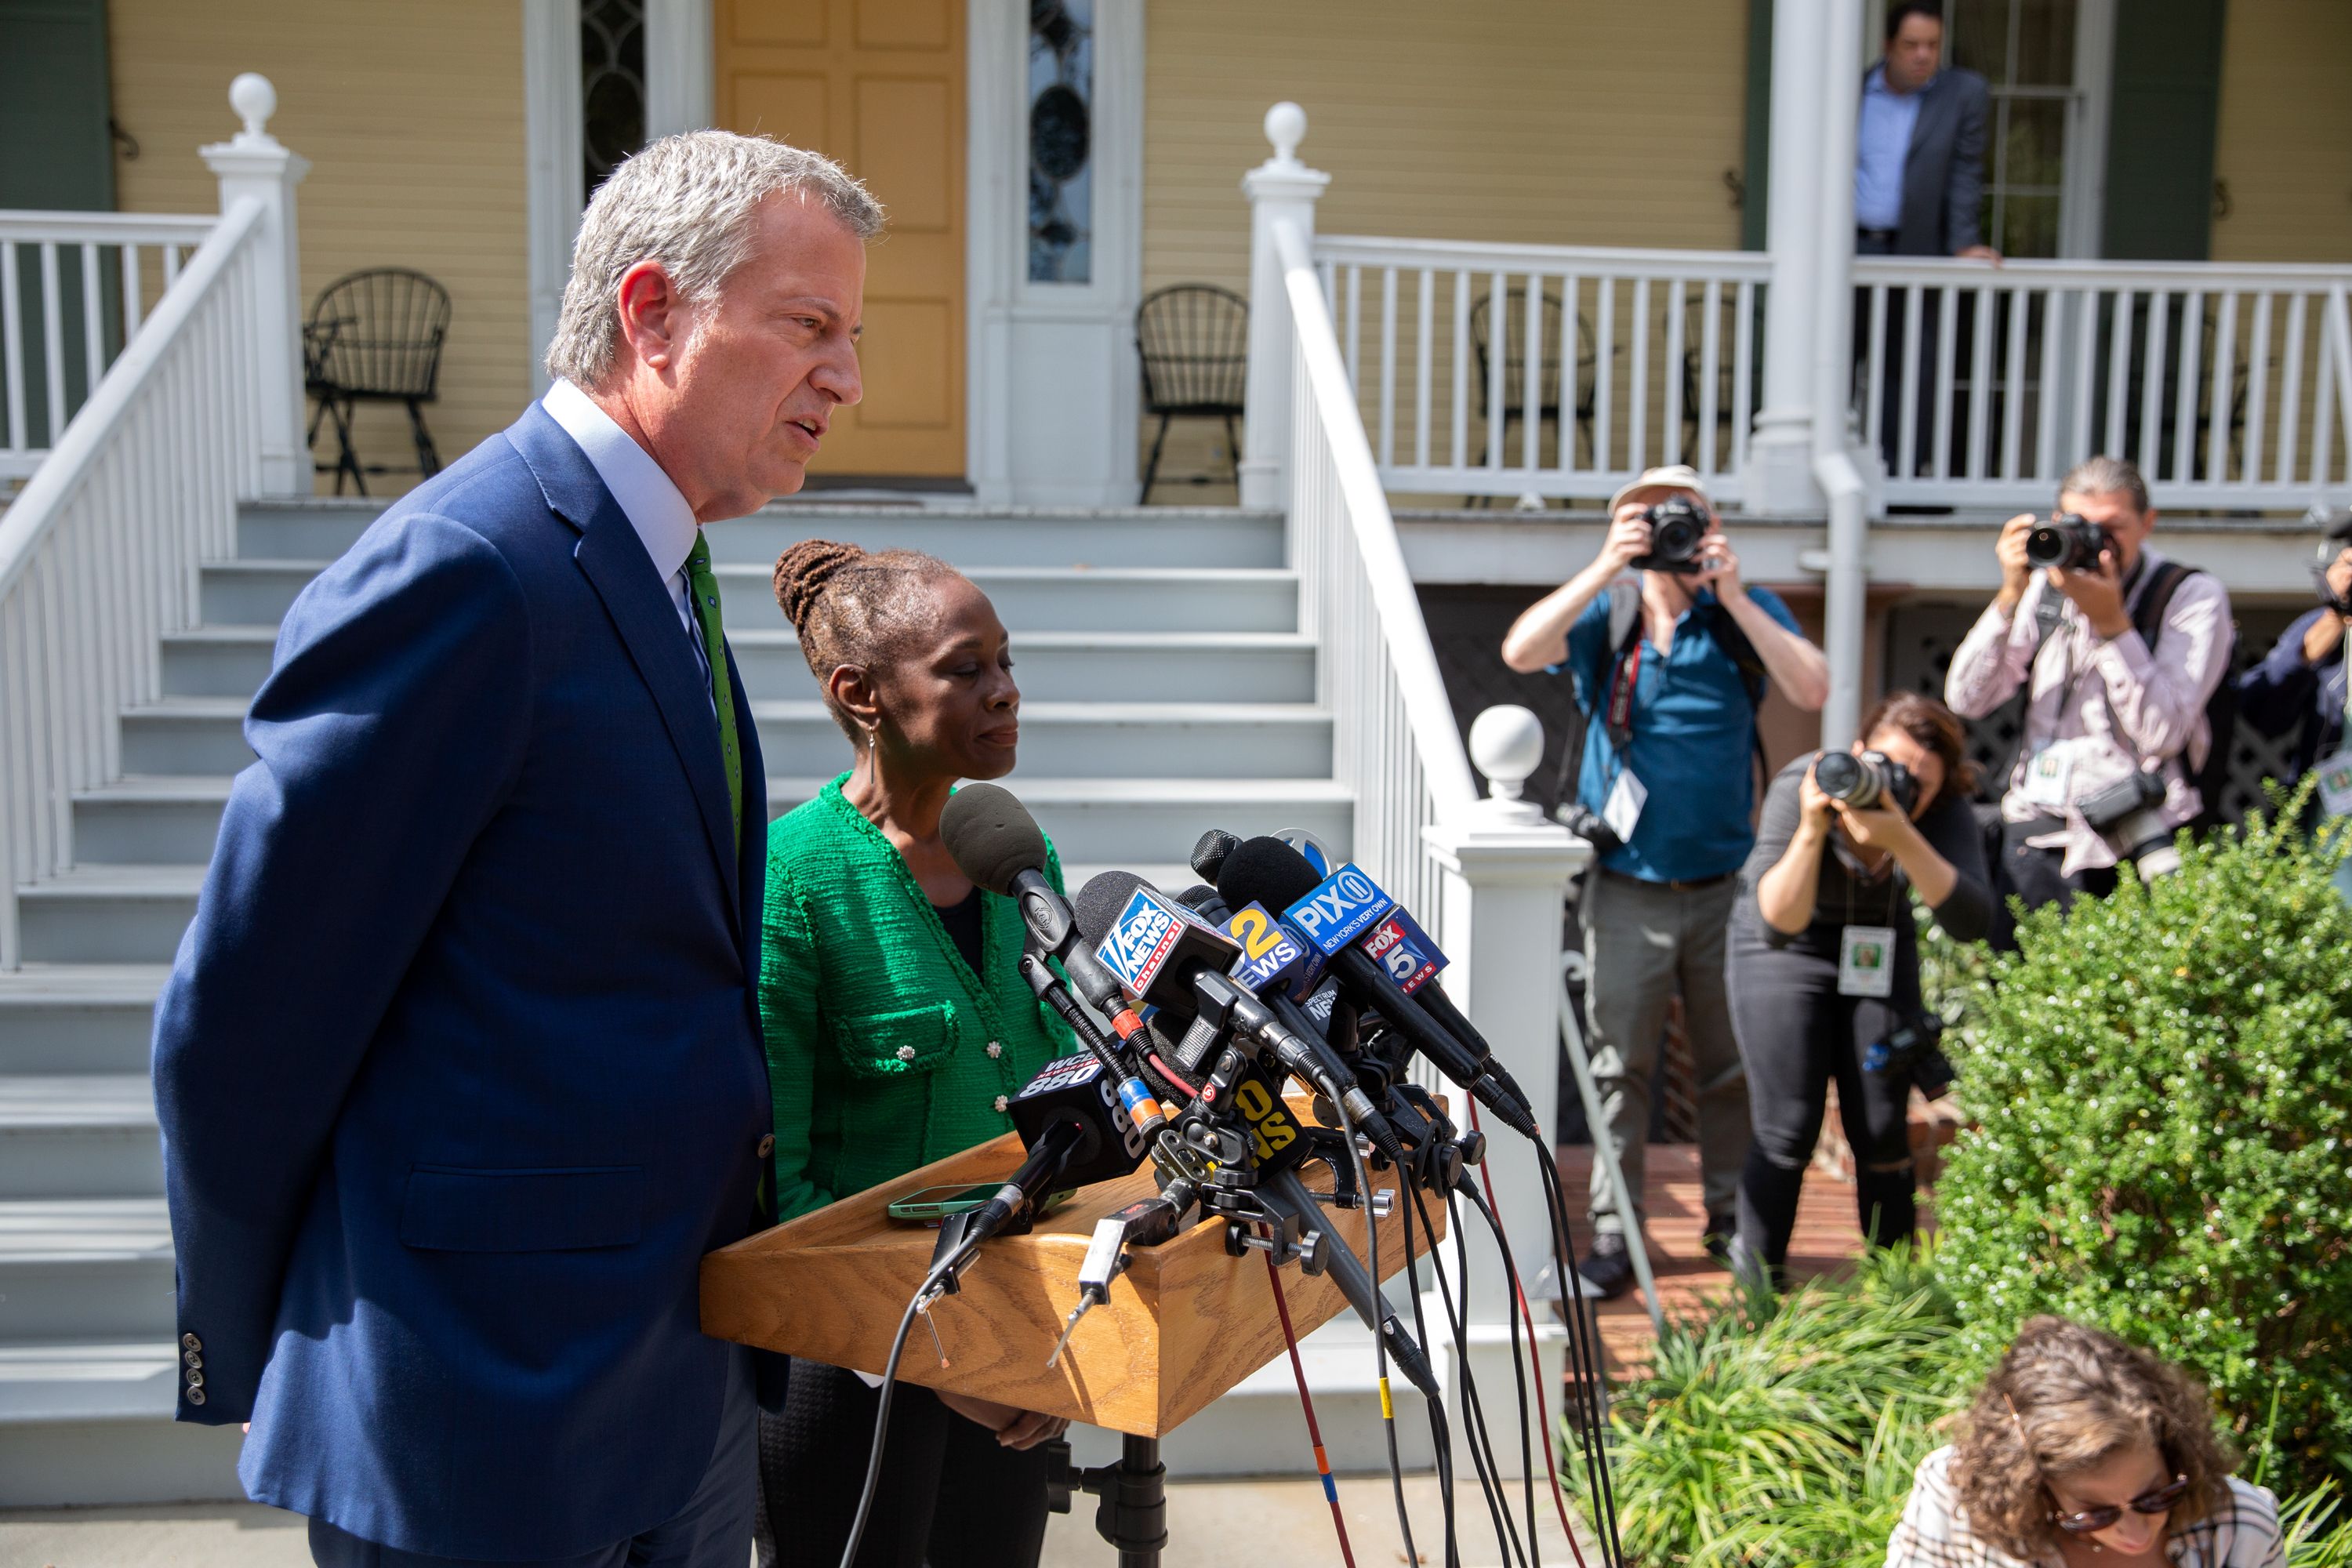 Mayor Bill de Blasio and First Lady Chirlane McCray announce the end of his presidential bid during a press conference outside Gracie Mansion on Friday, Sept. 20, 2019.